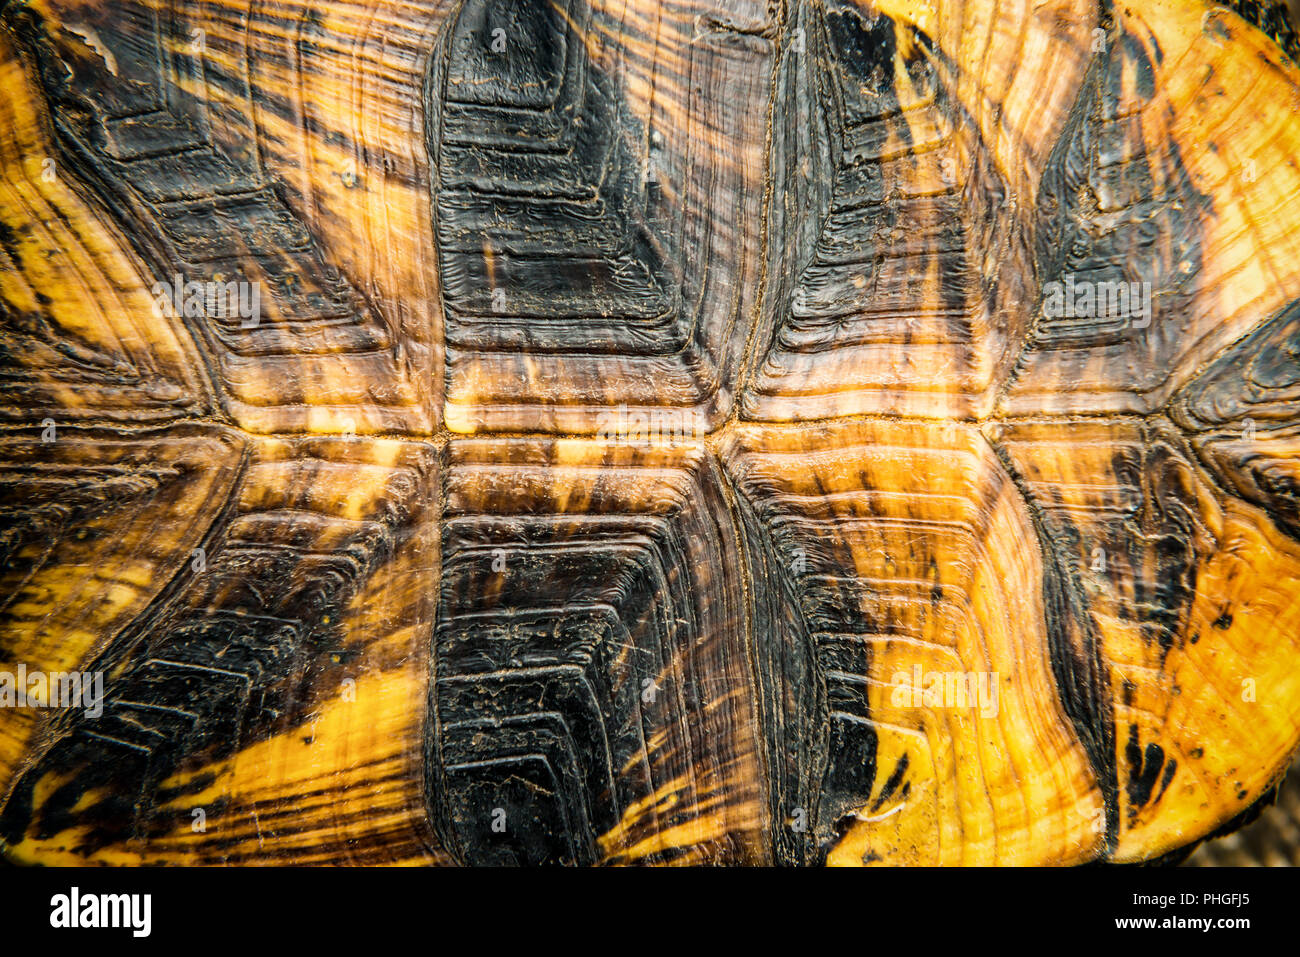 Texture of turtle shell Stock Photo